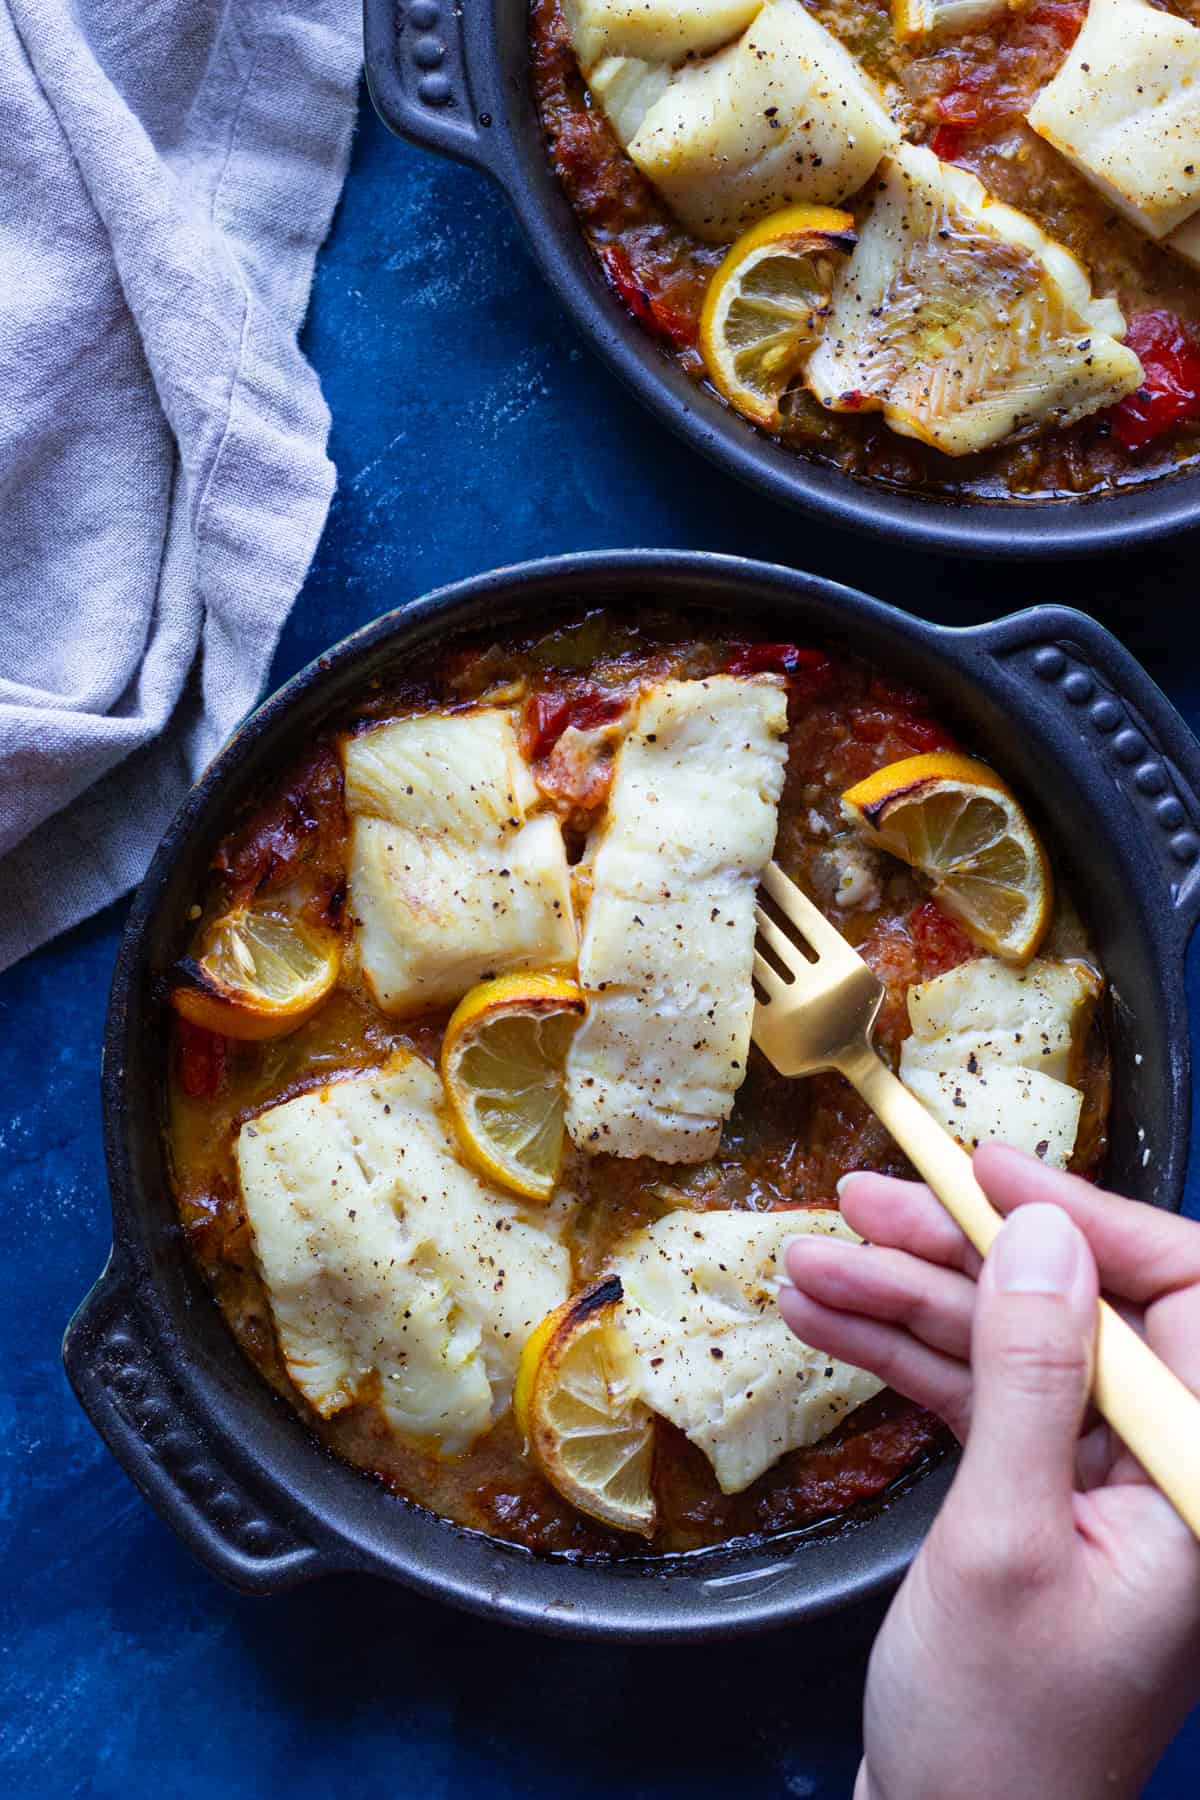 This baked cod recipe is a keeper. Tender baked cod fillets are made with vegetables such as onions and tomatoes for maximum flavor.